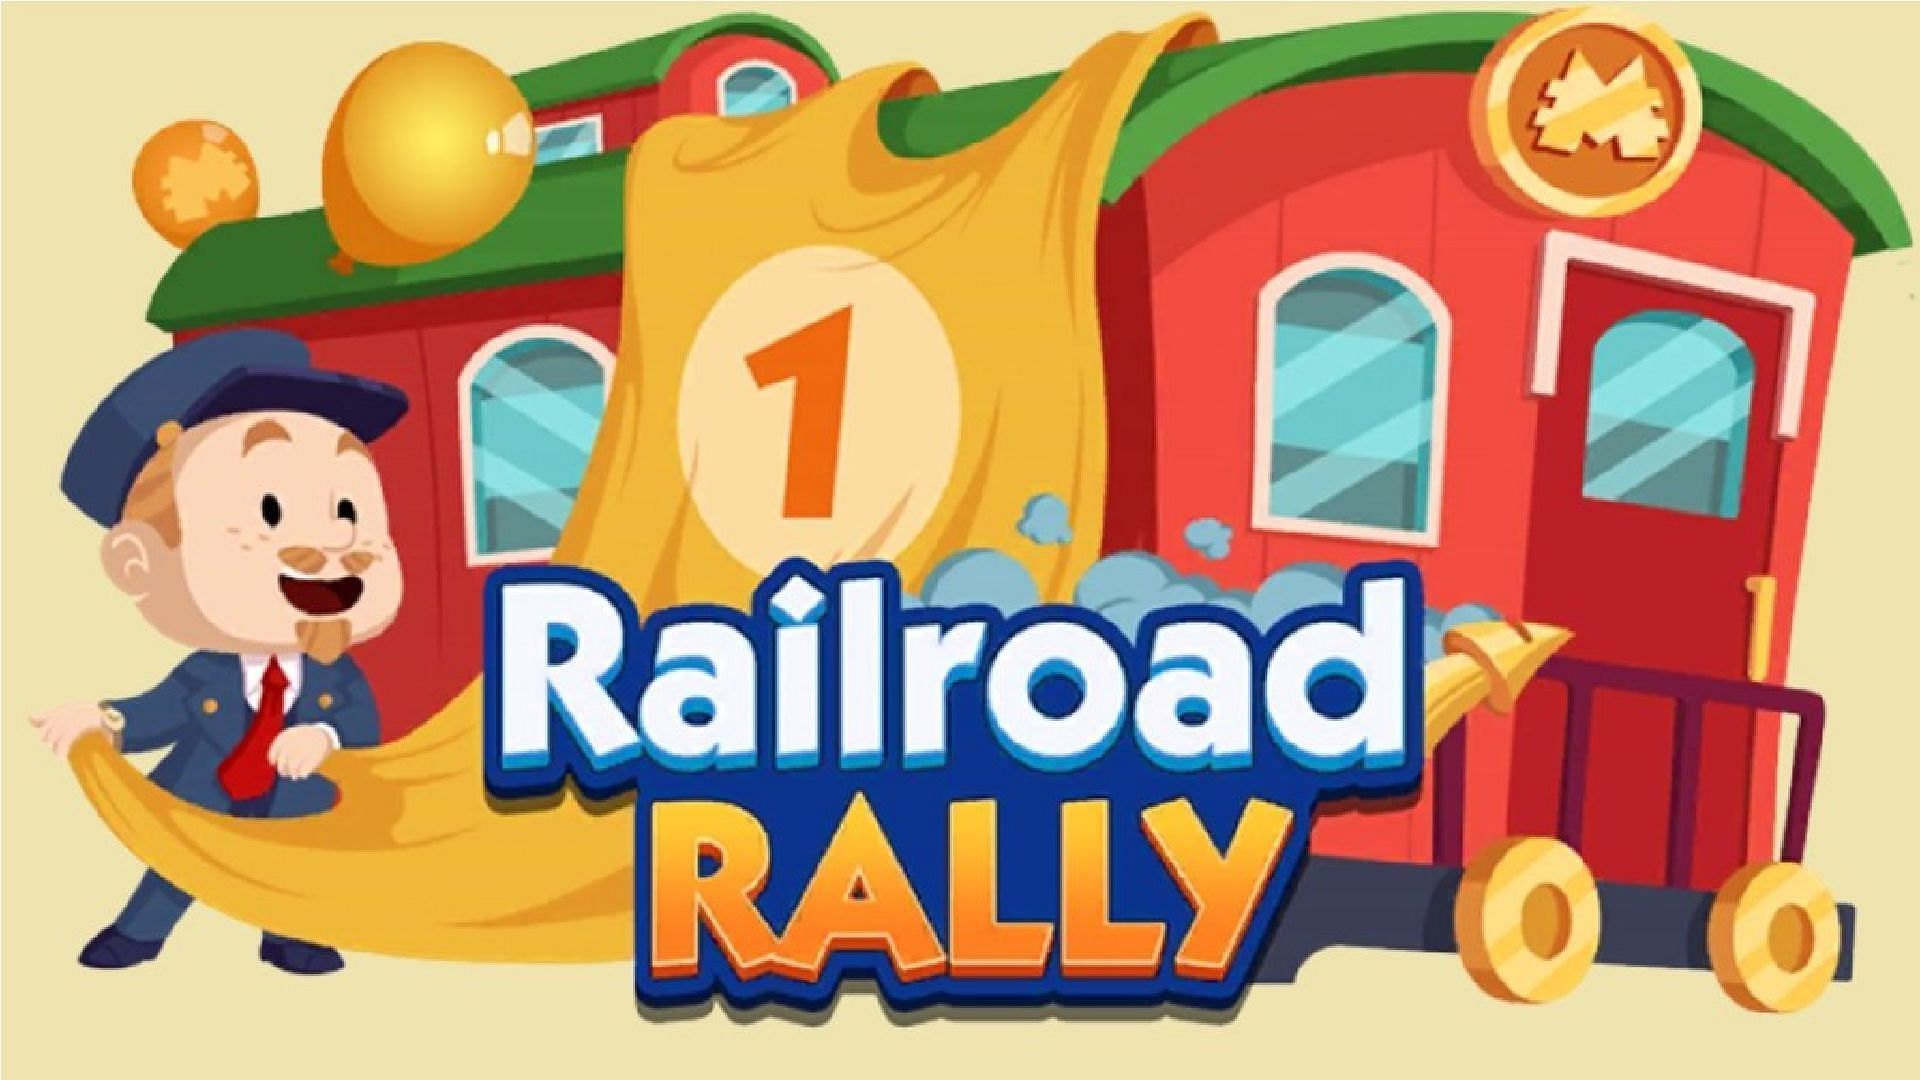 Railroad Rally is the current ongoing event (at the time of writing) in Monopoly Go (Image via Scopely)